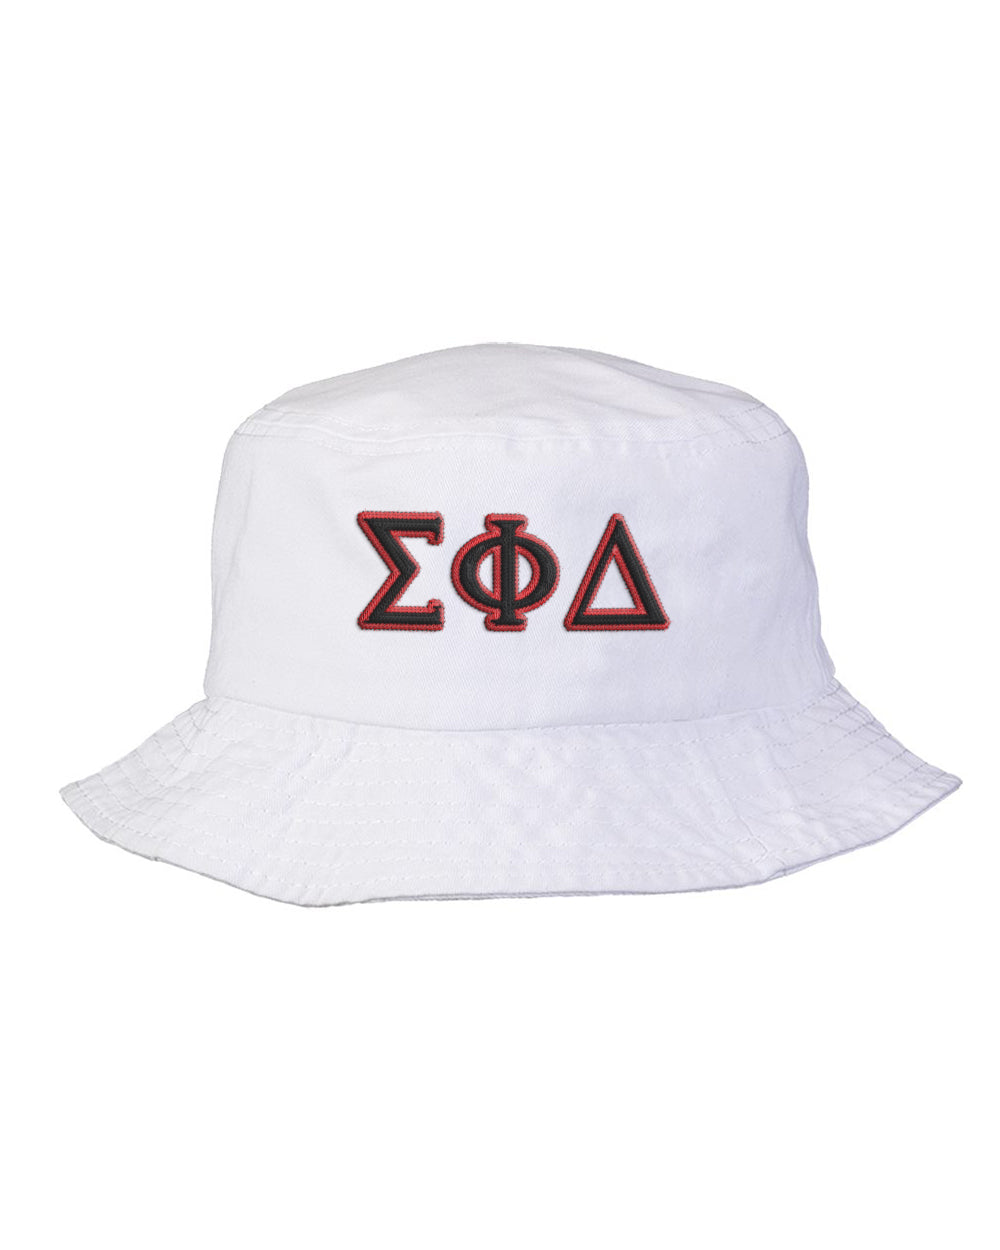 Sigma Phi Delta Embroidered Bucket Hat